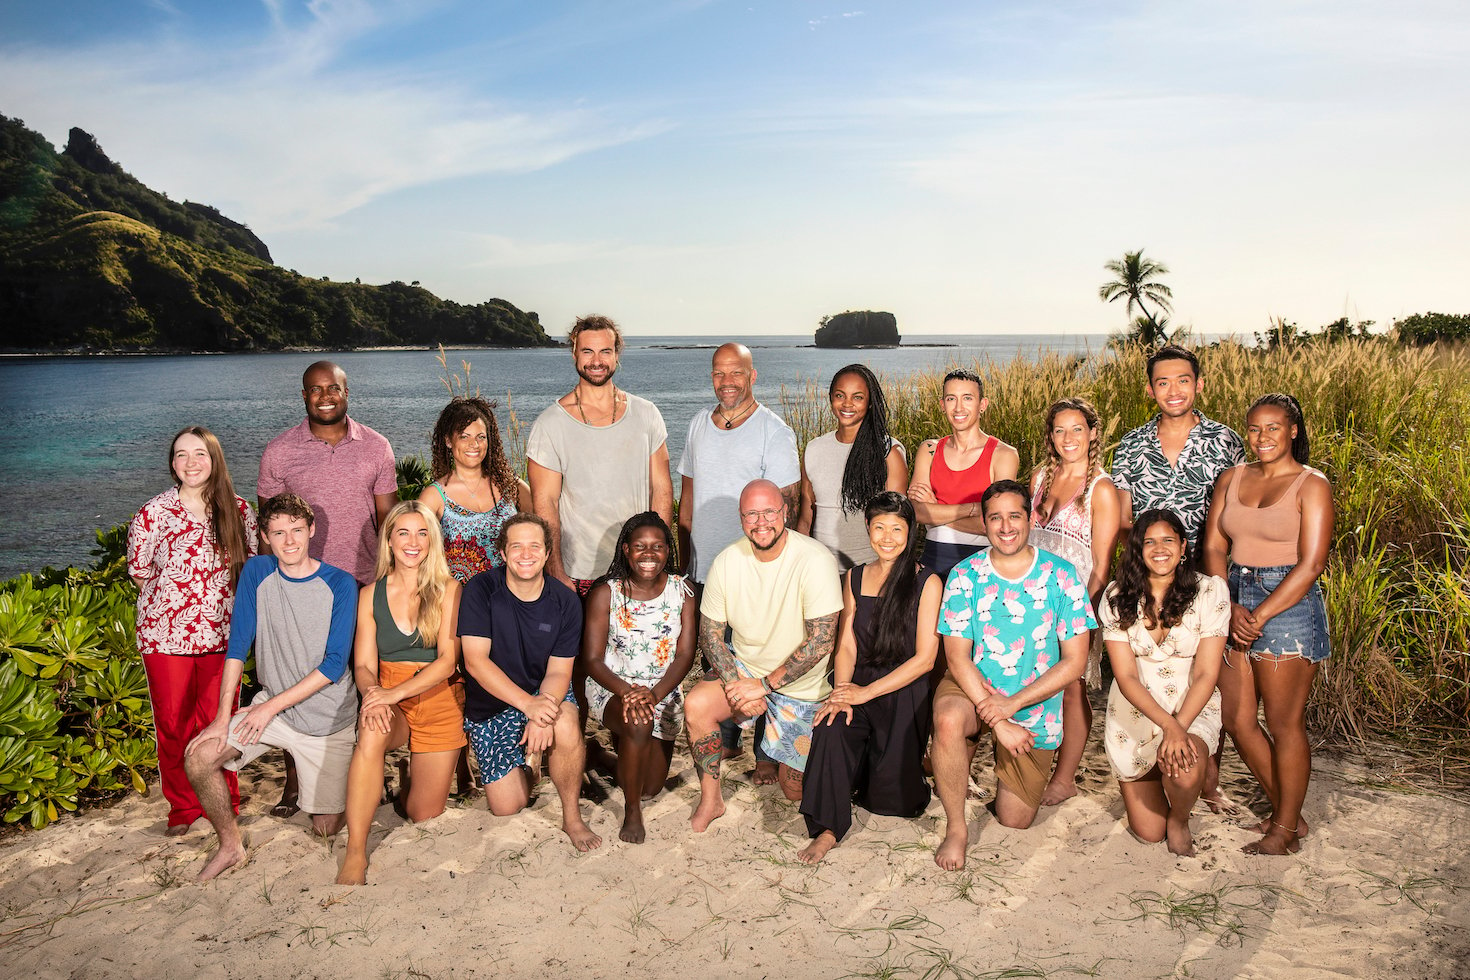 'Survivor' Season 42 cast standing together on a beach and smiling